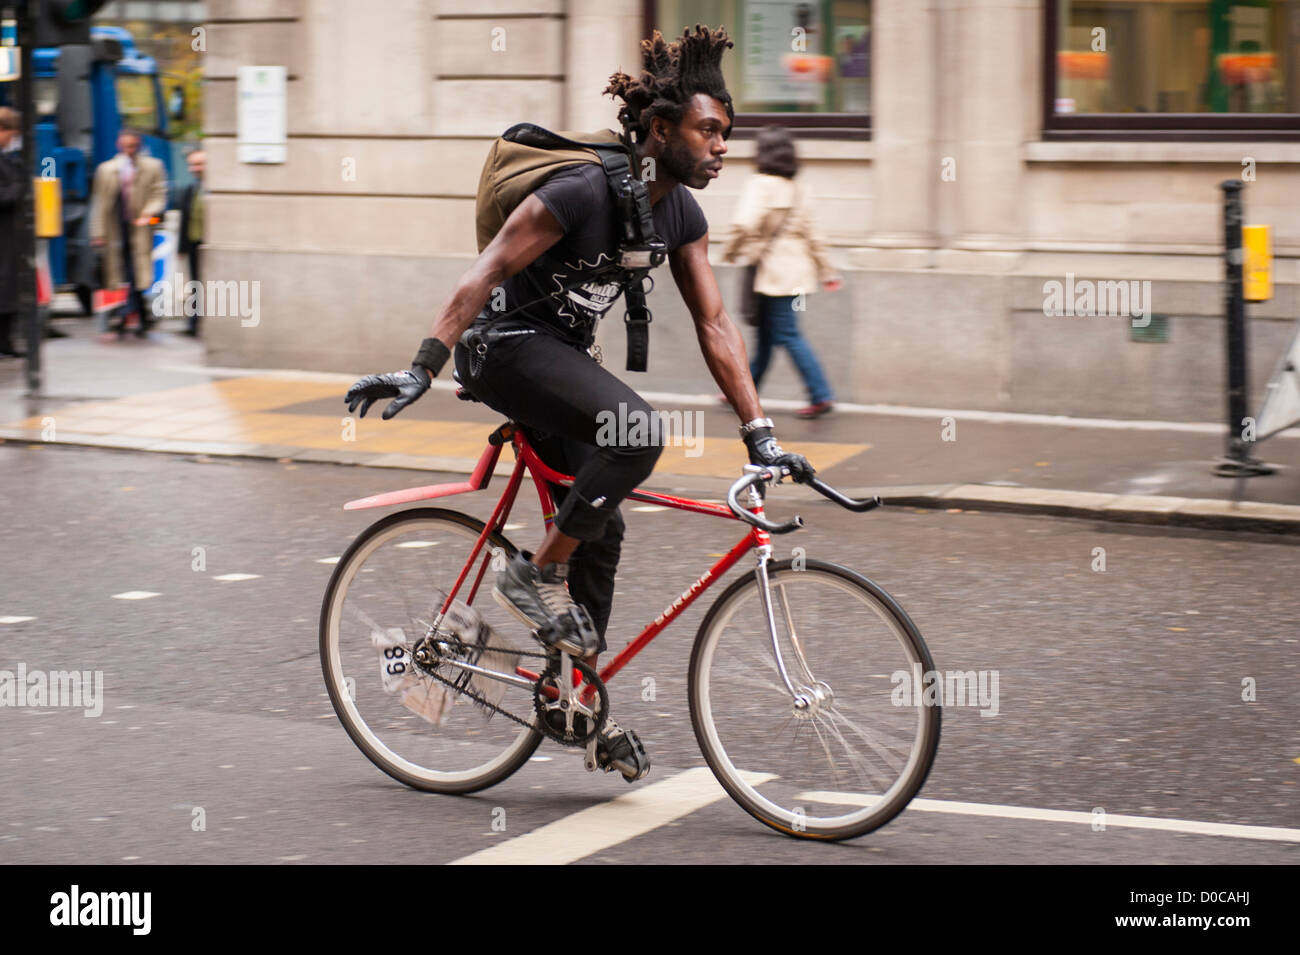 London , City , black man boy male messenger on bike bicycle cycle biker with Afro hair hairstyle Stock Photo